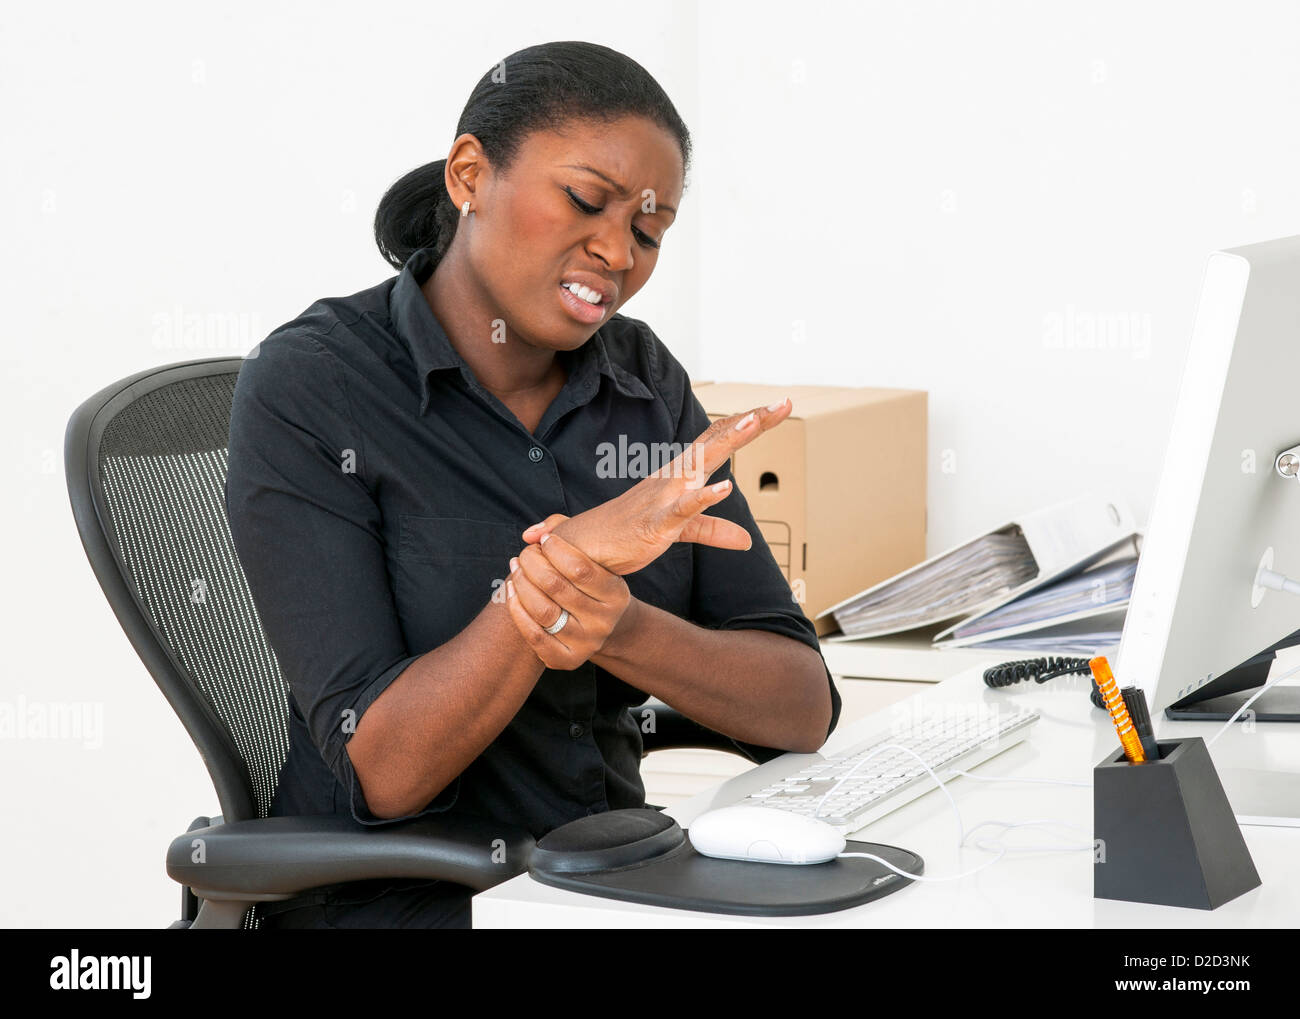 MODEL RELEASED Repetitive strain injury RSI Stock Photo